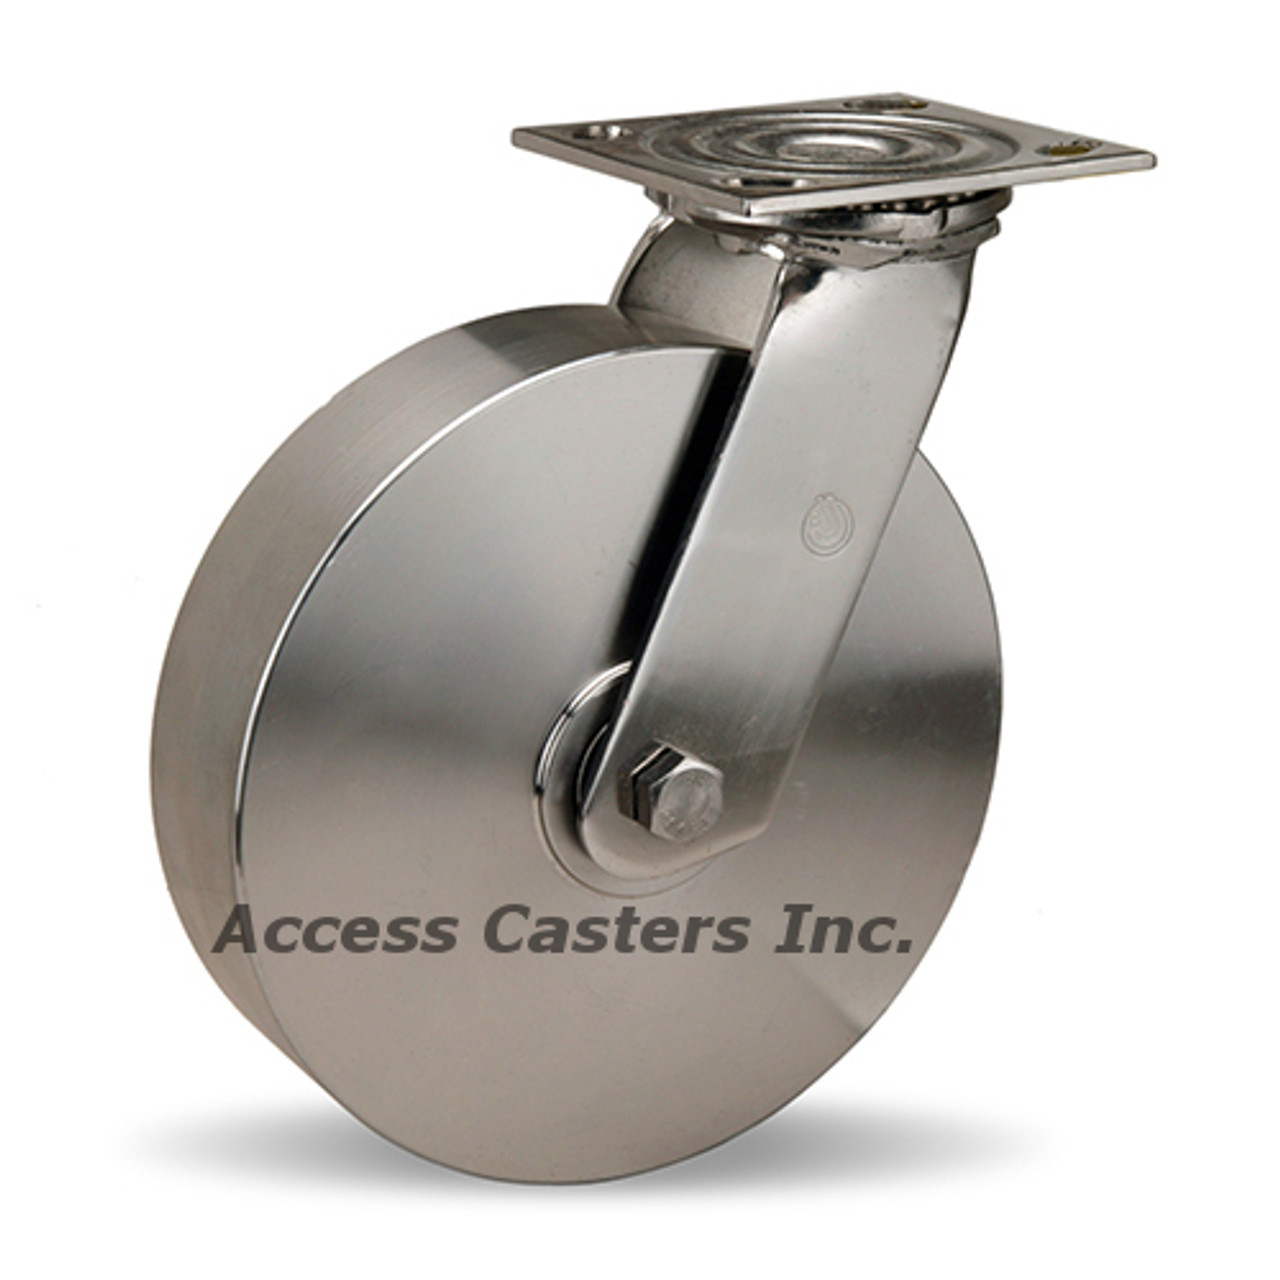 S-STA-8S 8 inch stainless steel swivel caster with Stainless Steel wheel